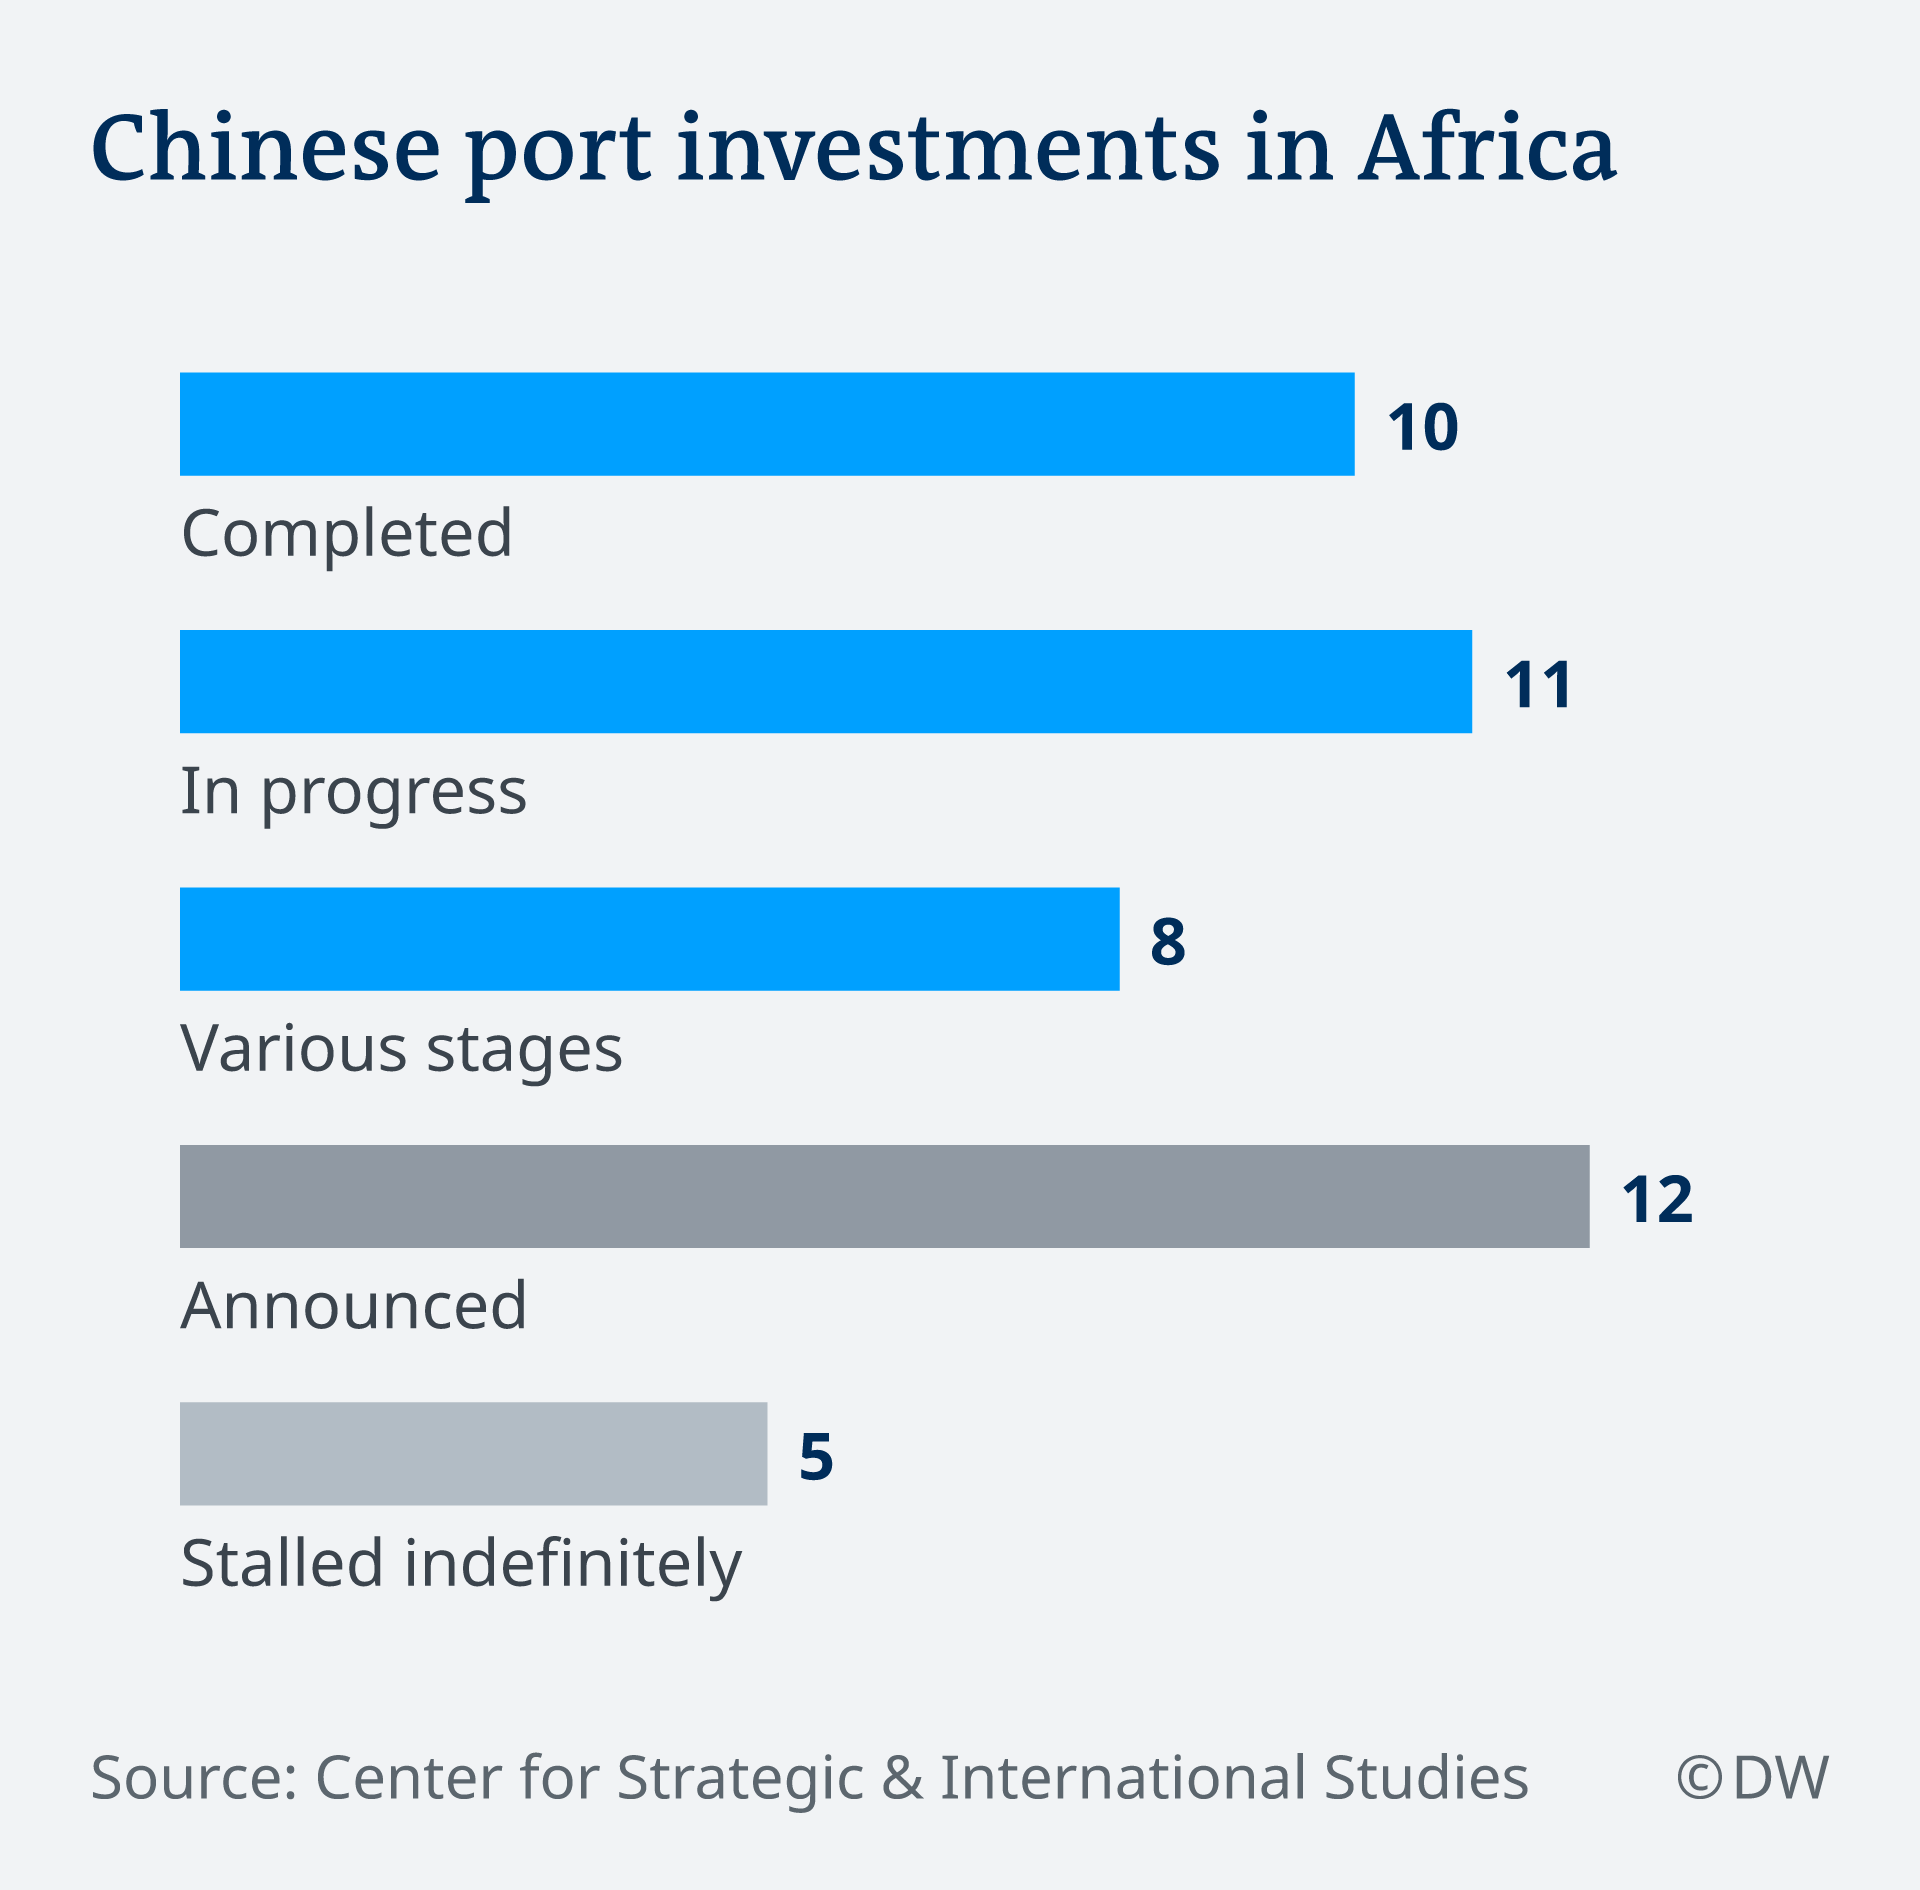 Chenise investments in African ports EN 